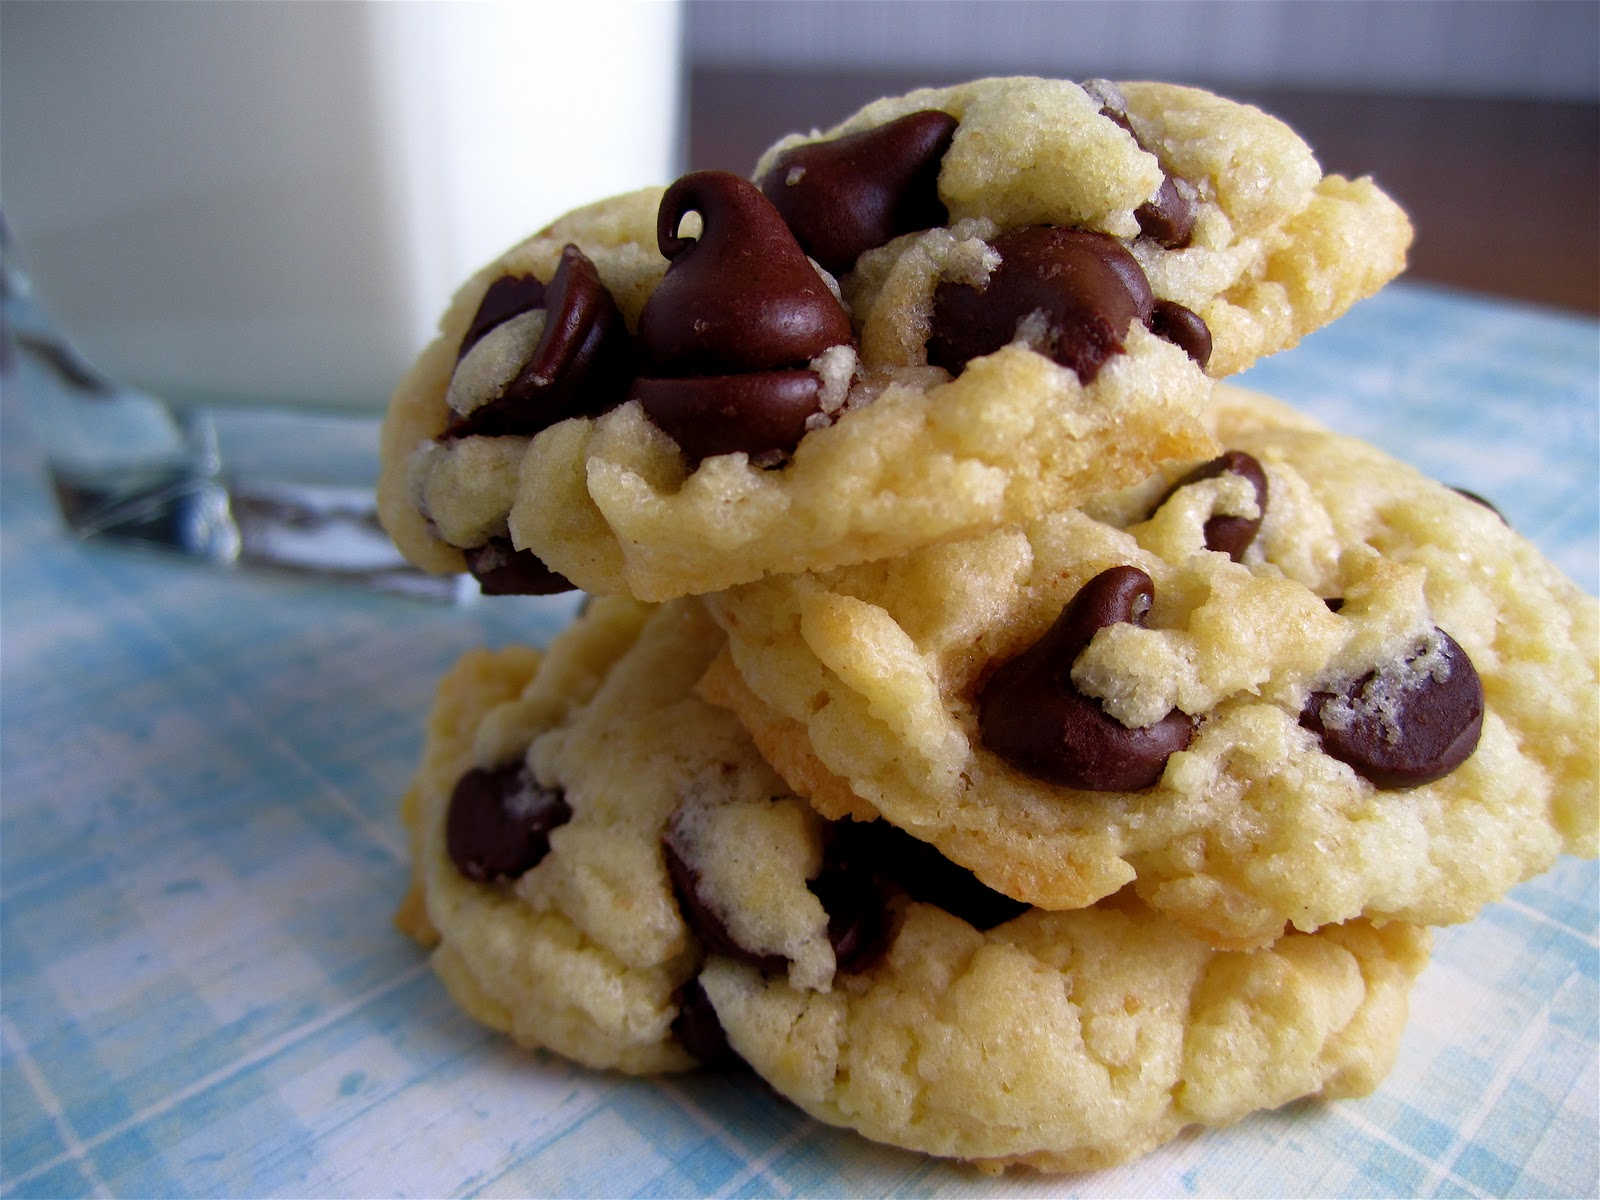 What is an easy cake mix cookie recipe?